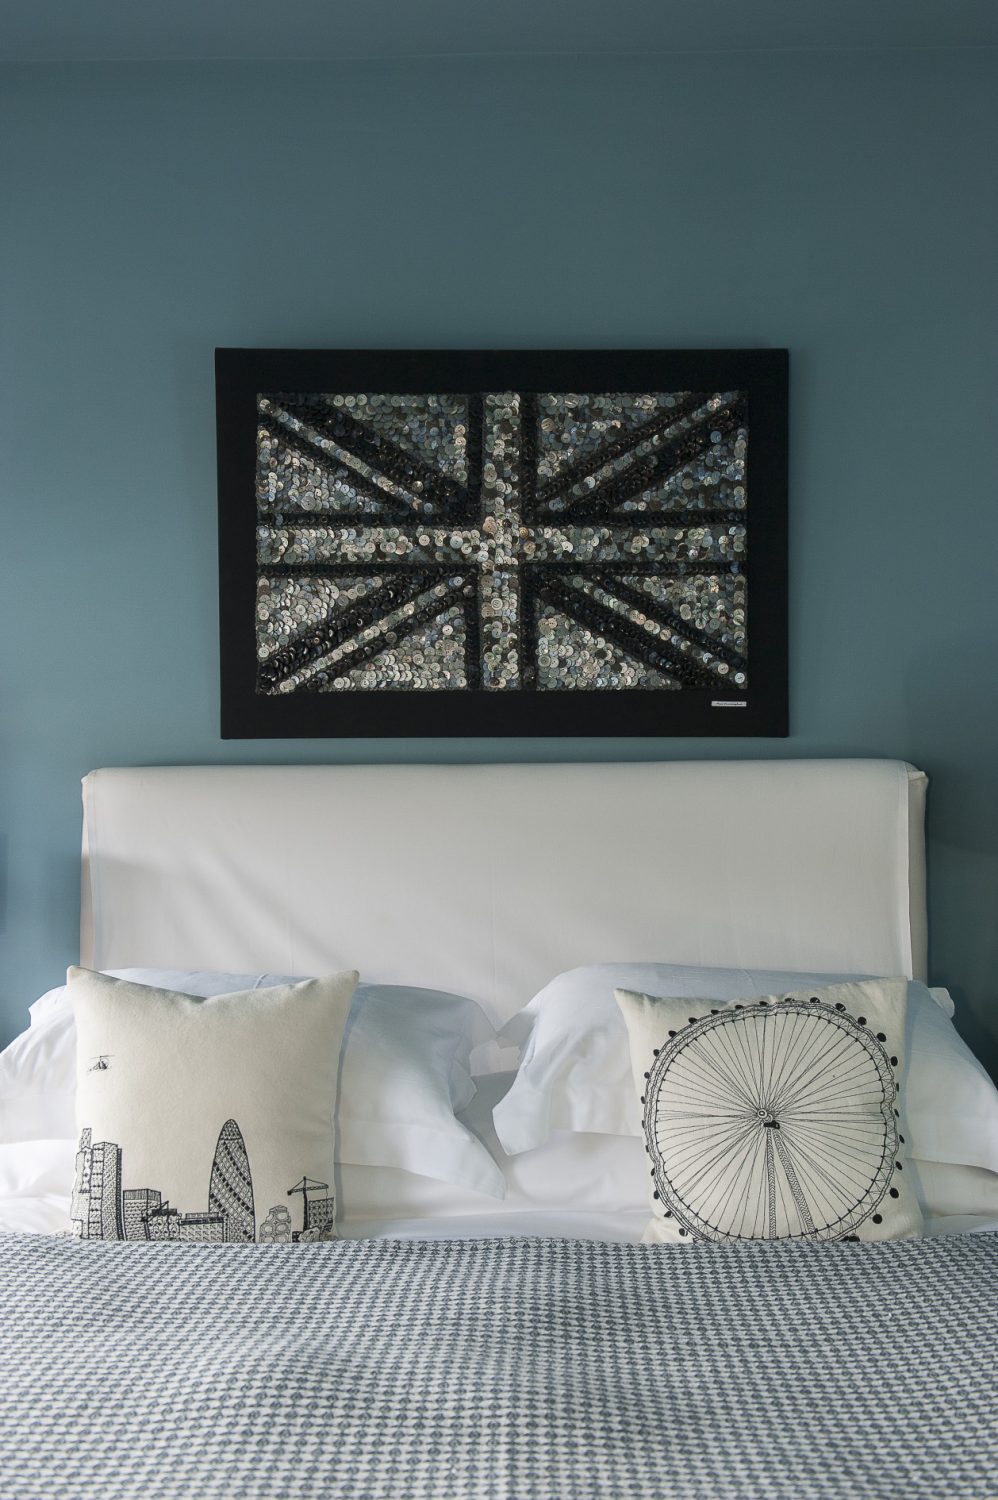 An Ann Carrington original, this time of a Union Jack, hangs above the bed.